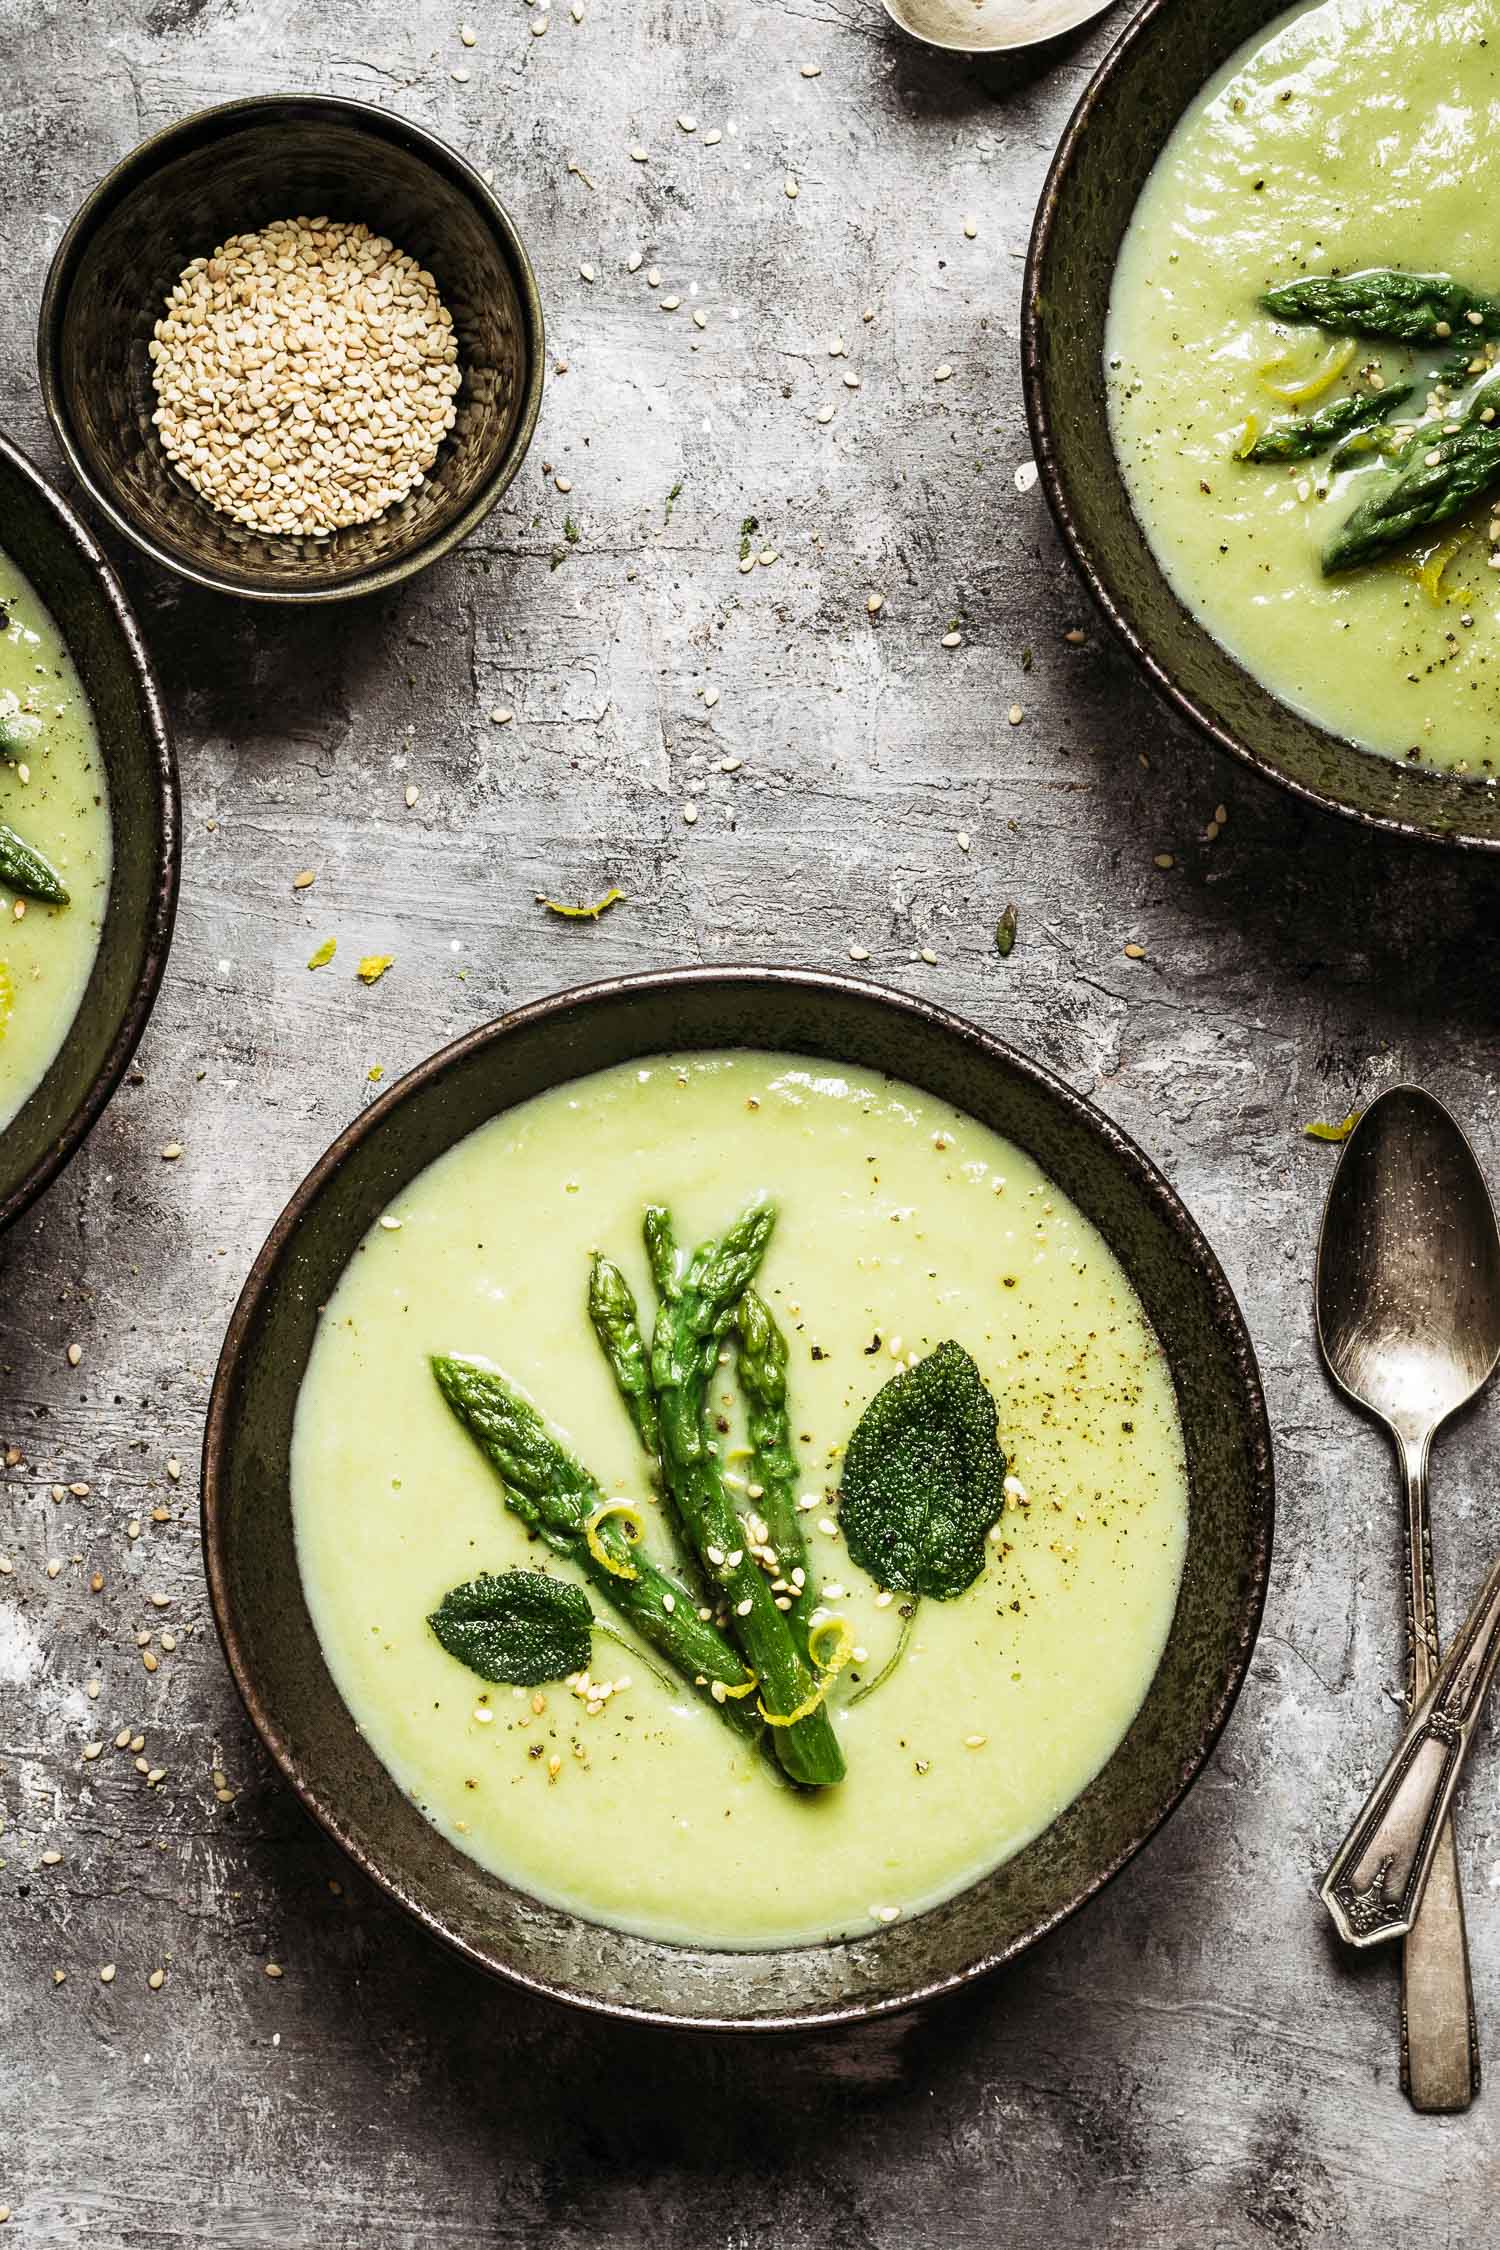 If you’re looking for the recipe of cream of asparagus soup with milk, you’re in the right place!